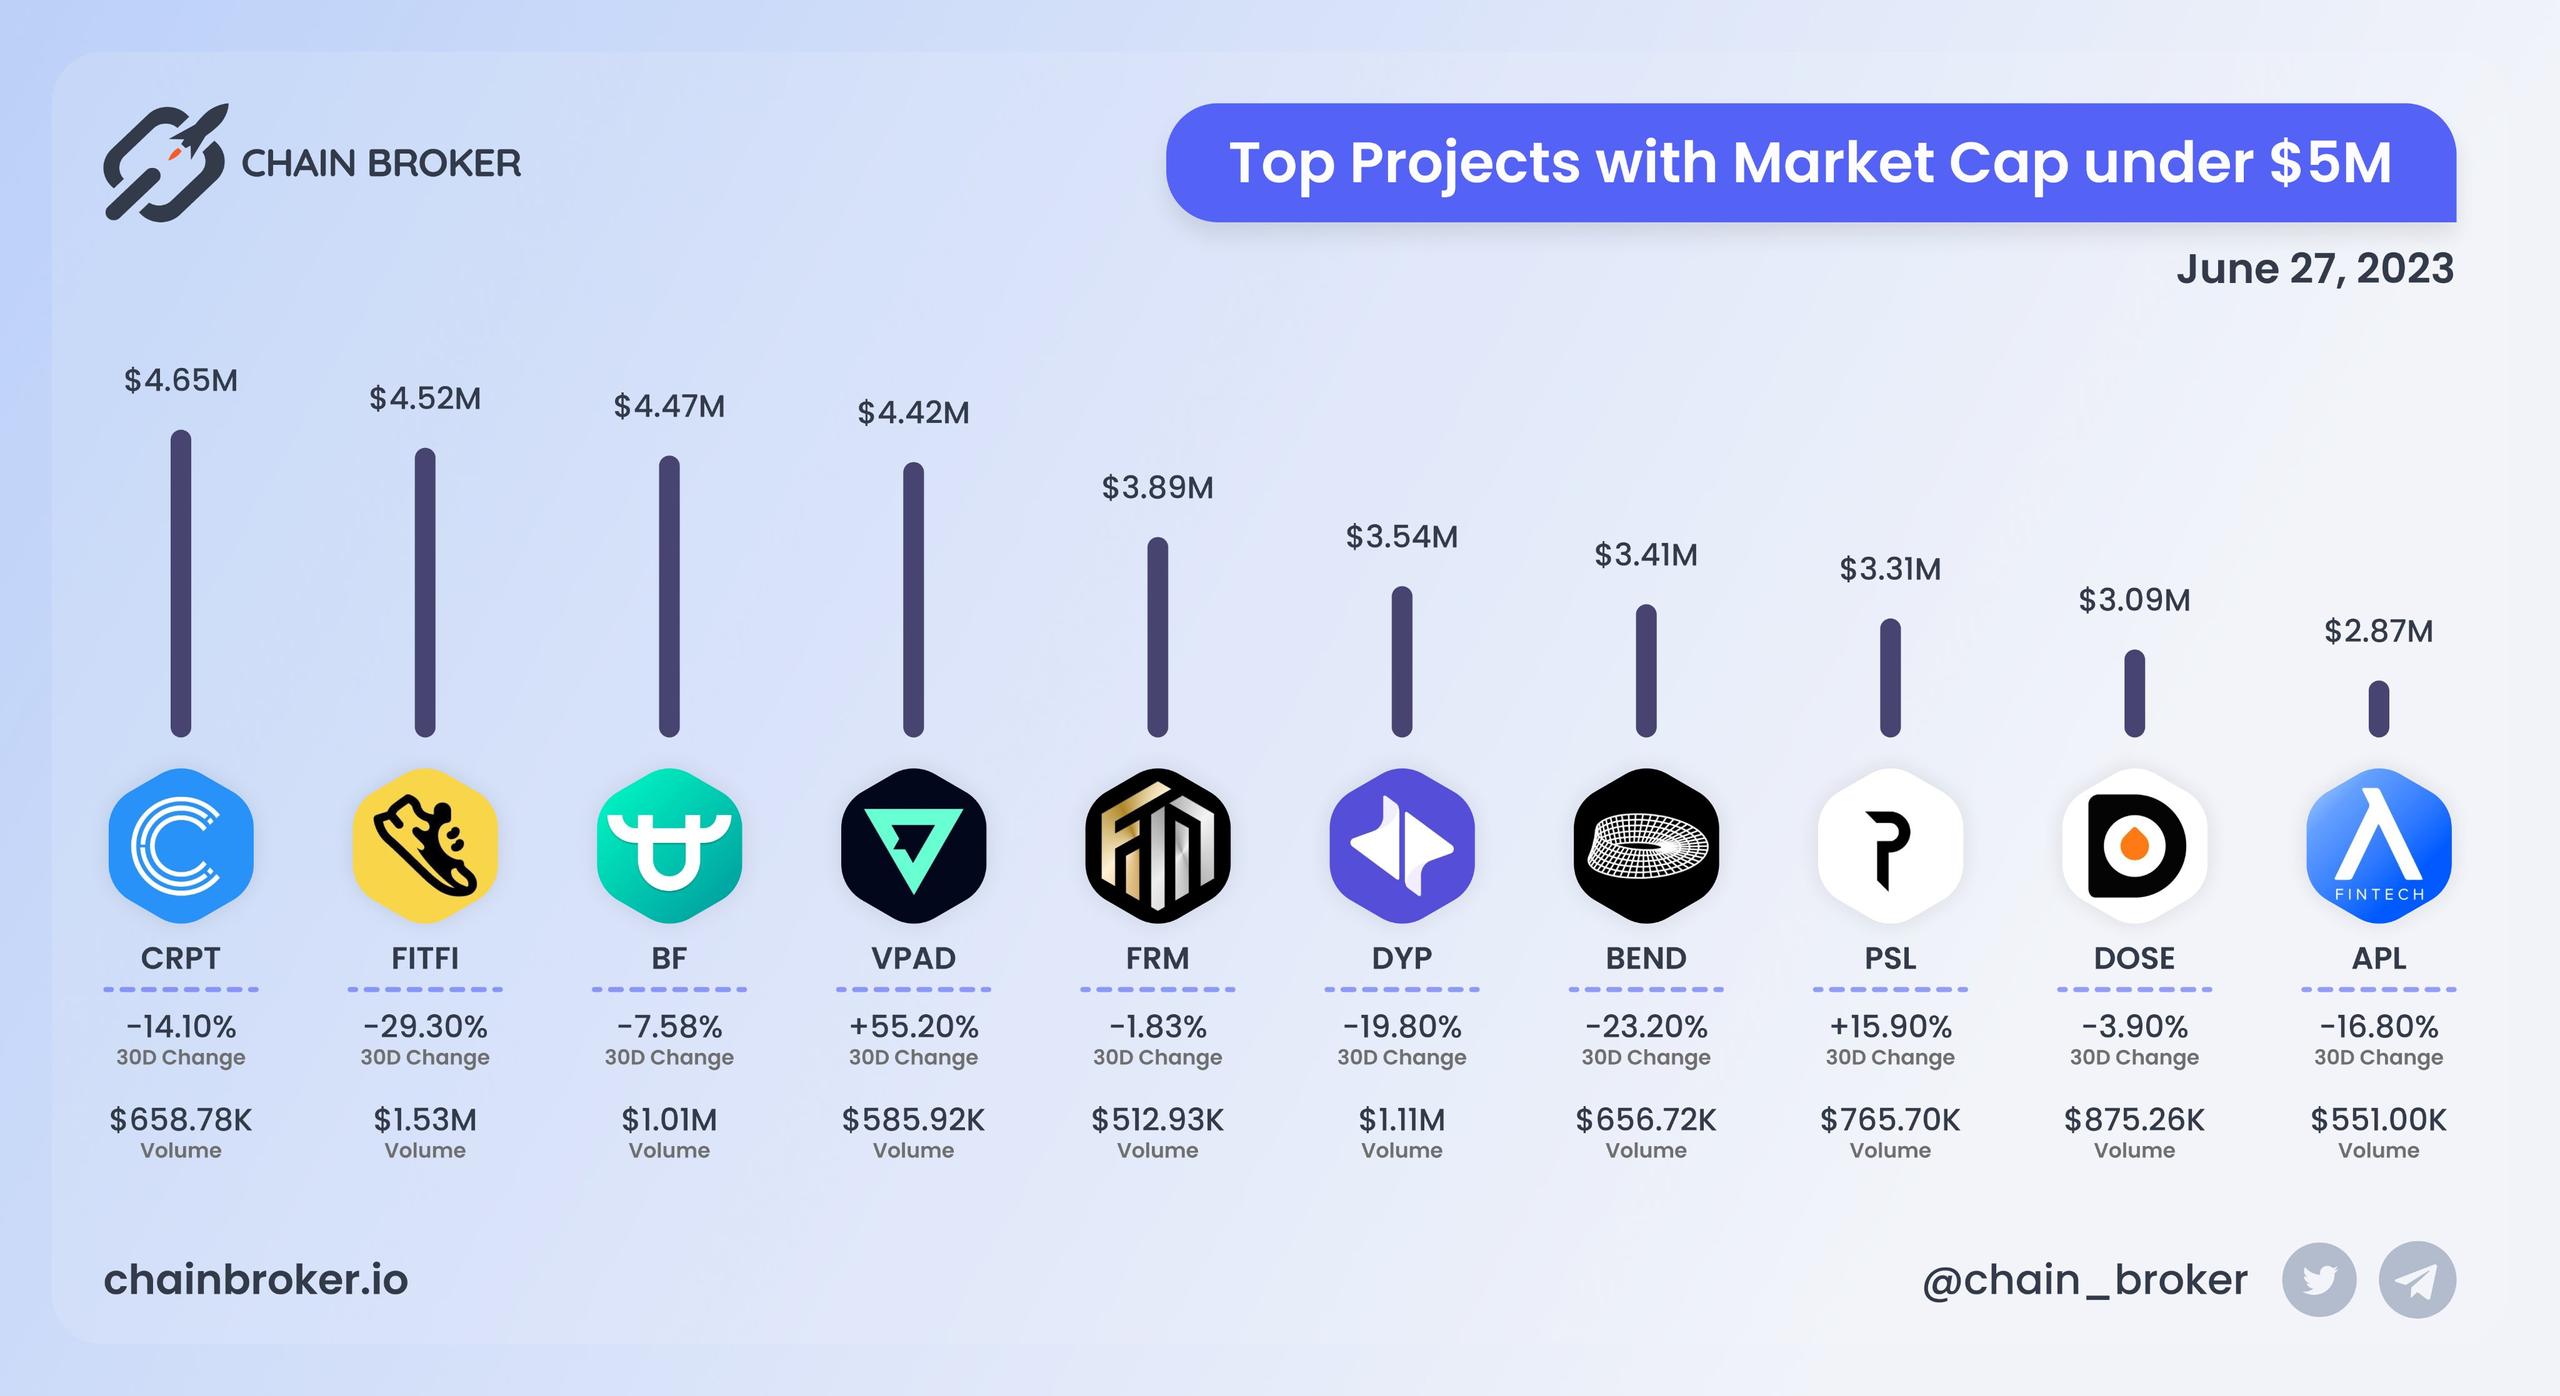 Top projects with Market Cap under $5M